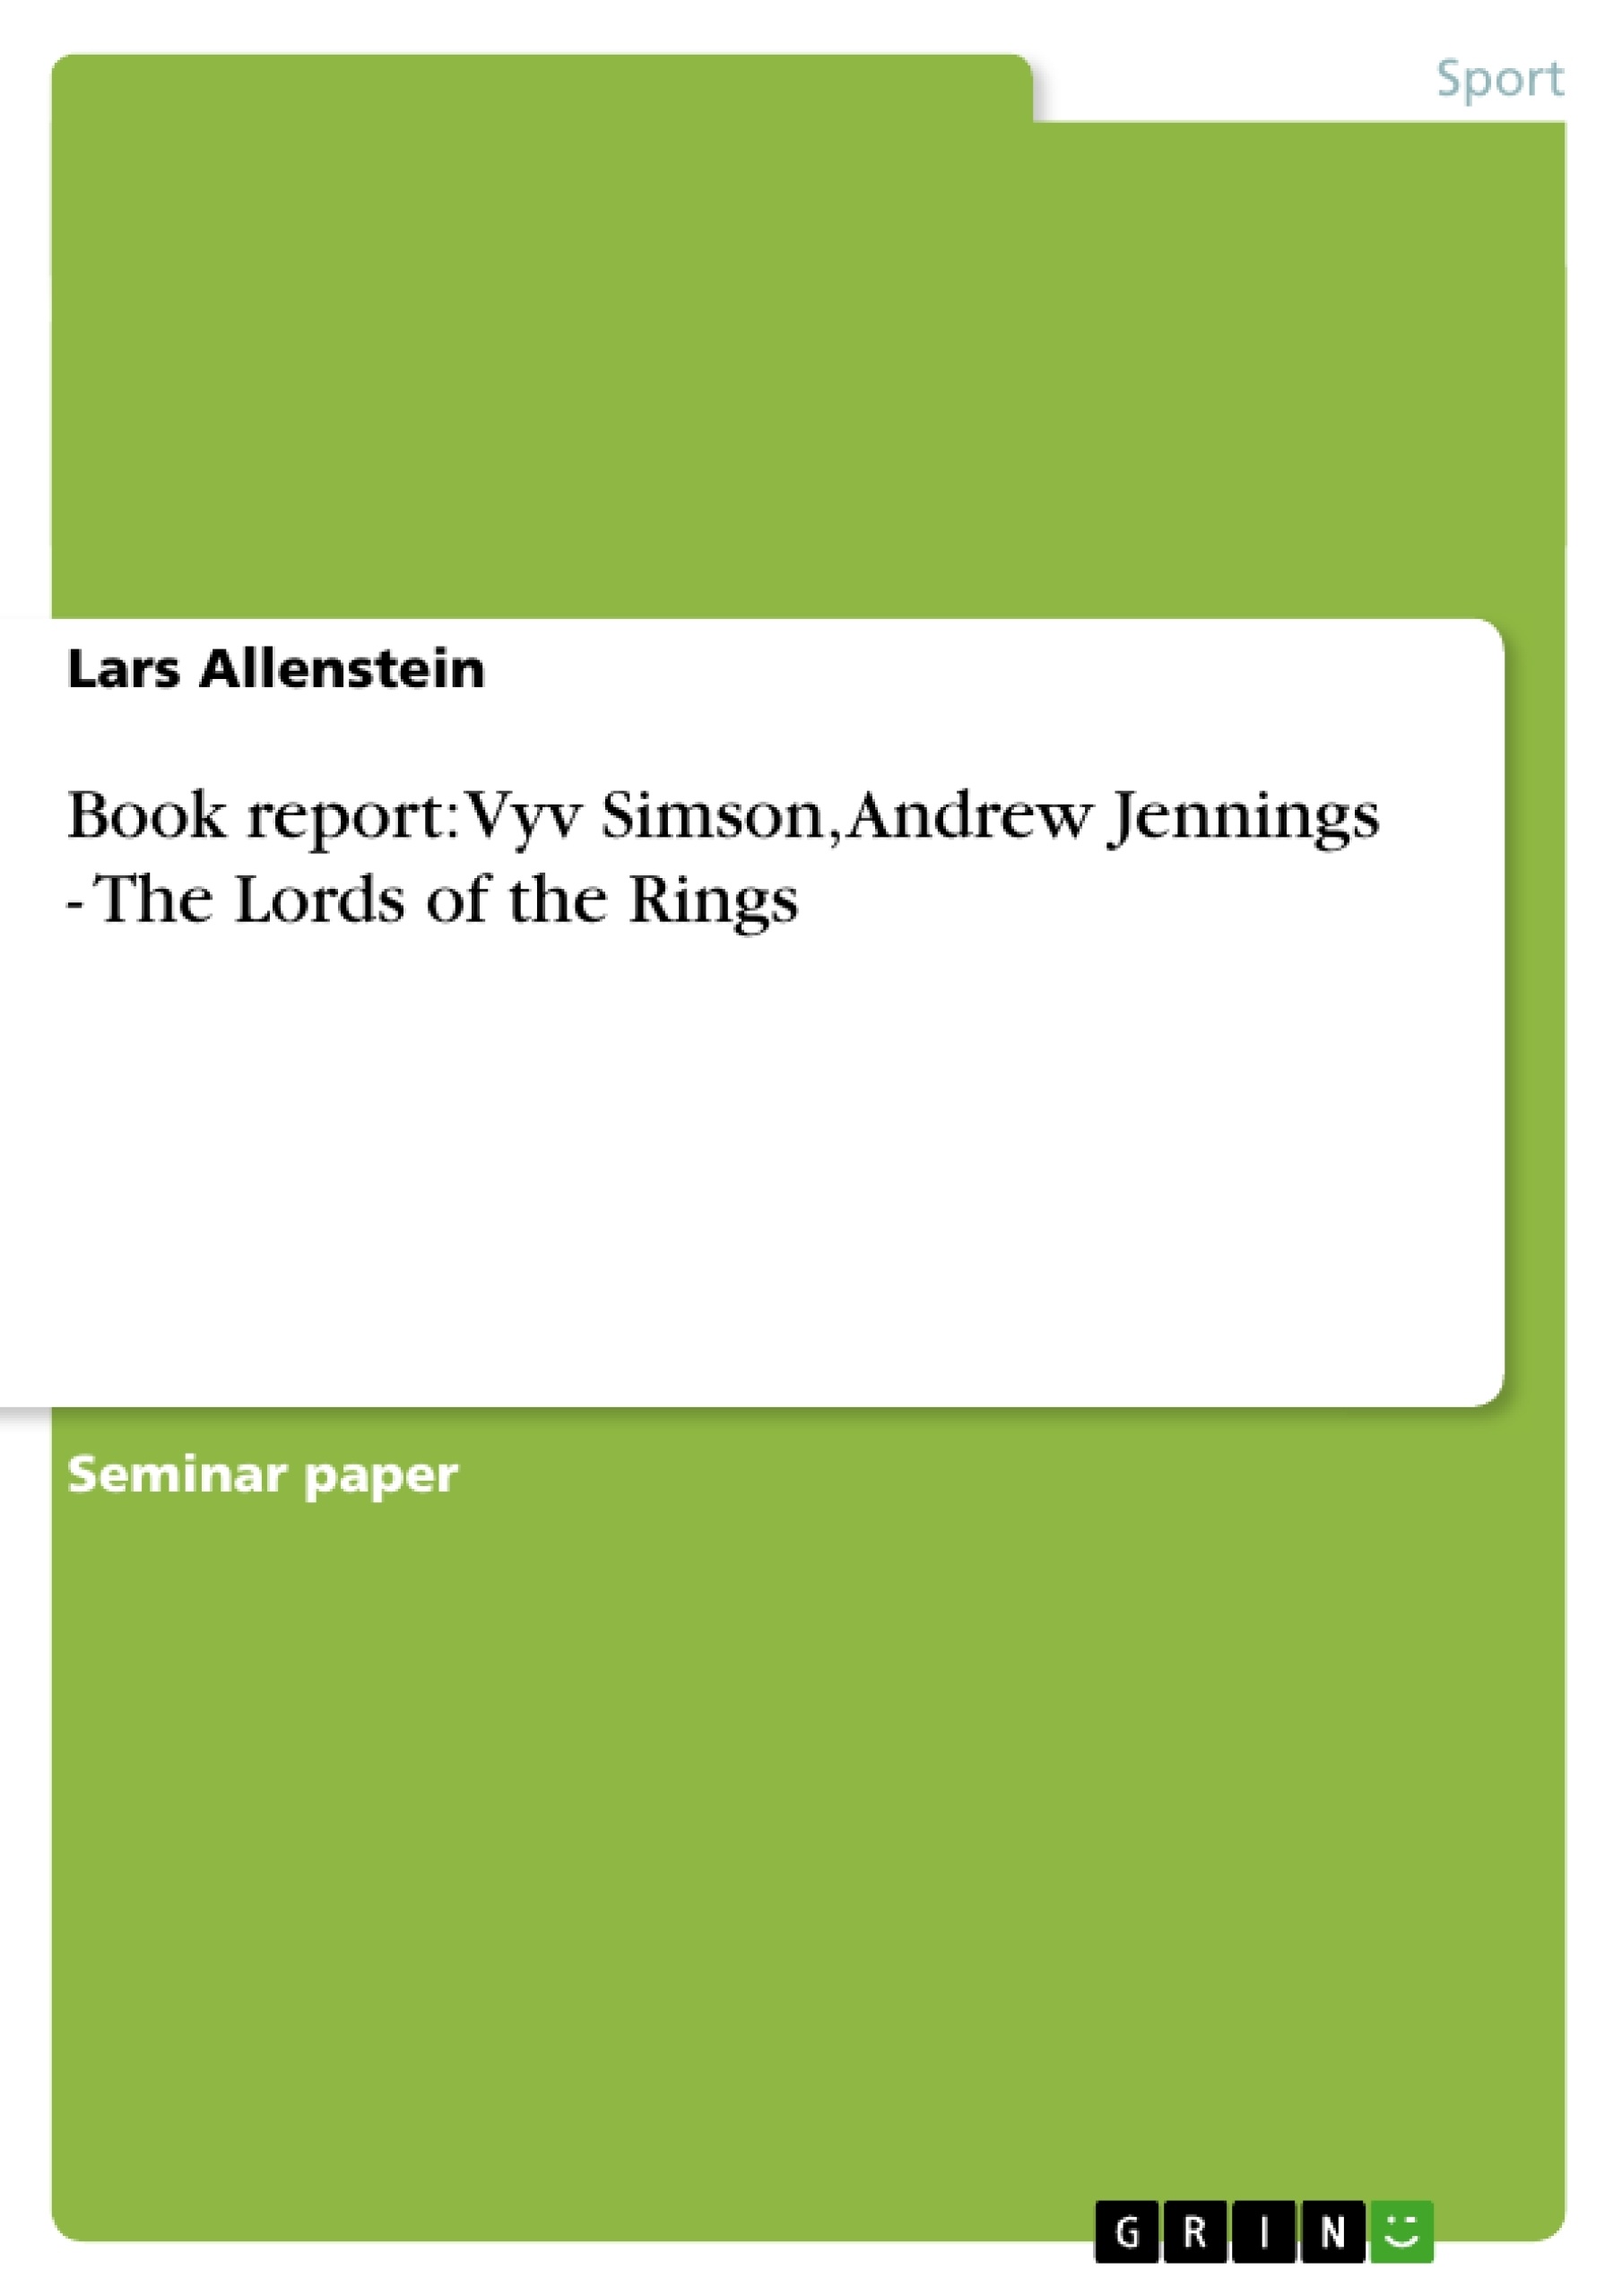 Title: Book report: Vyv Simson, Andrew Jennings - The Lords of the Rings